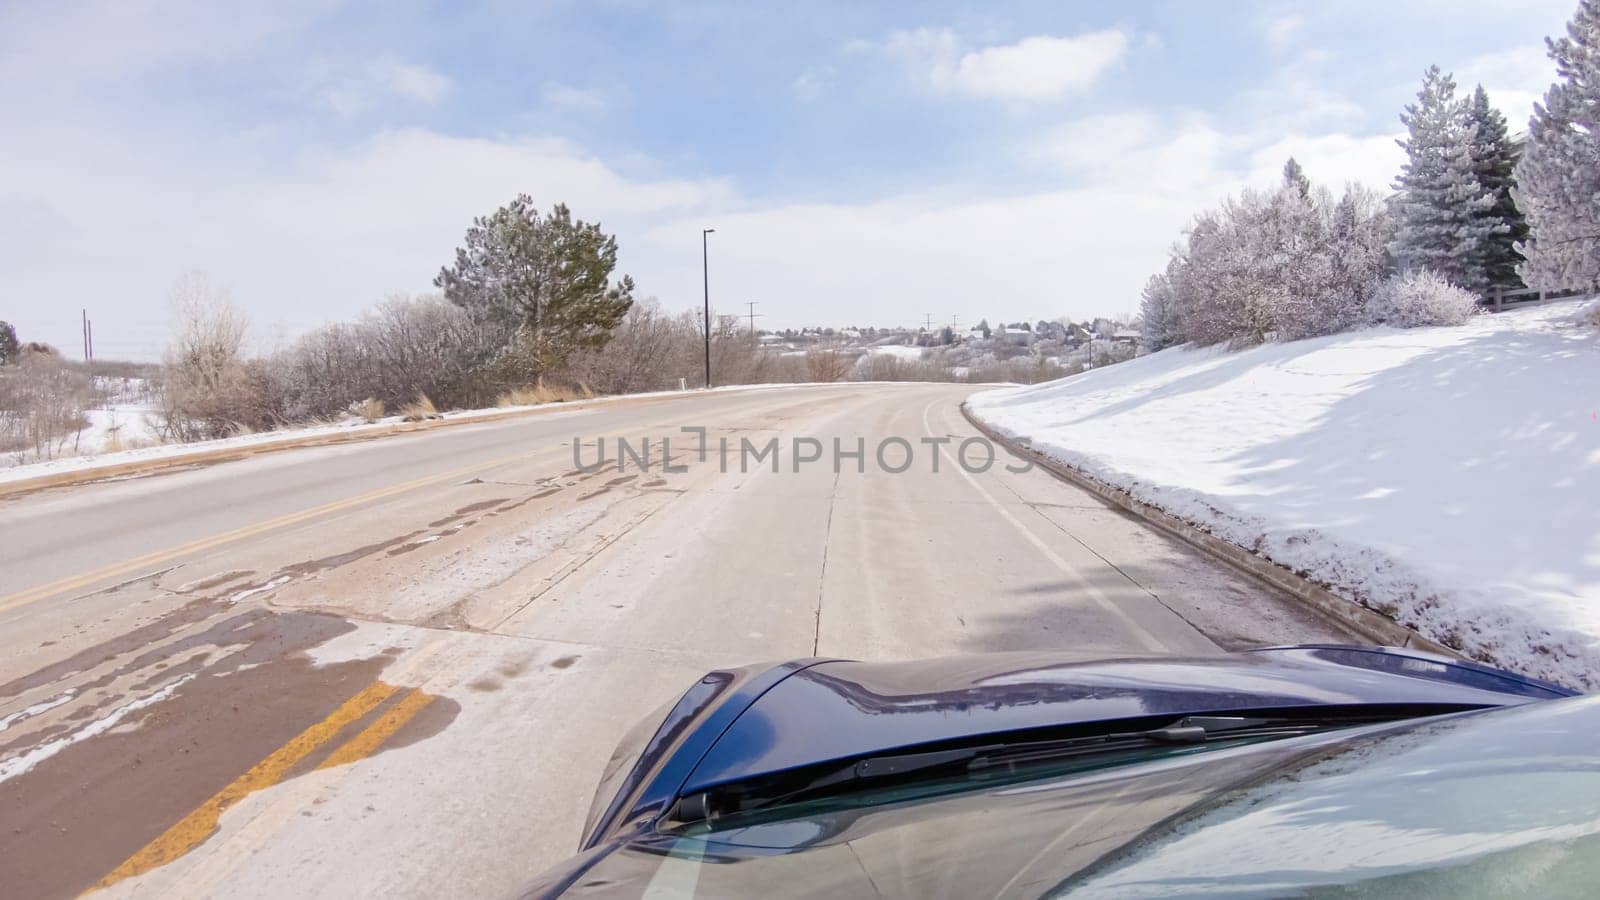 Traversing a freshly cleared, suburban road after a winter storm, one experiences a serene drive through an upscale residential neighborhood. Snow-covered houses and trees contribute to a picturesque winter scene, enhancing the tranquility of the journey.